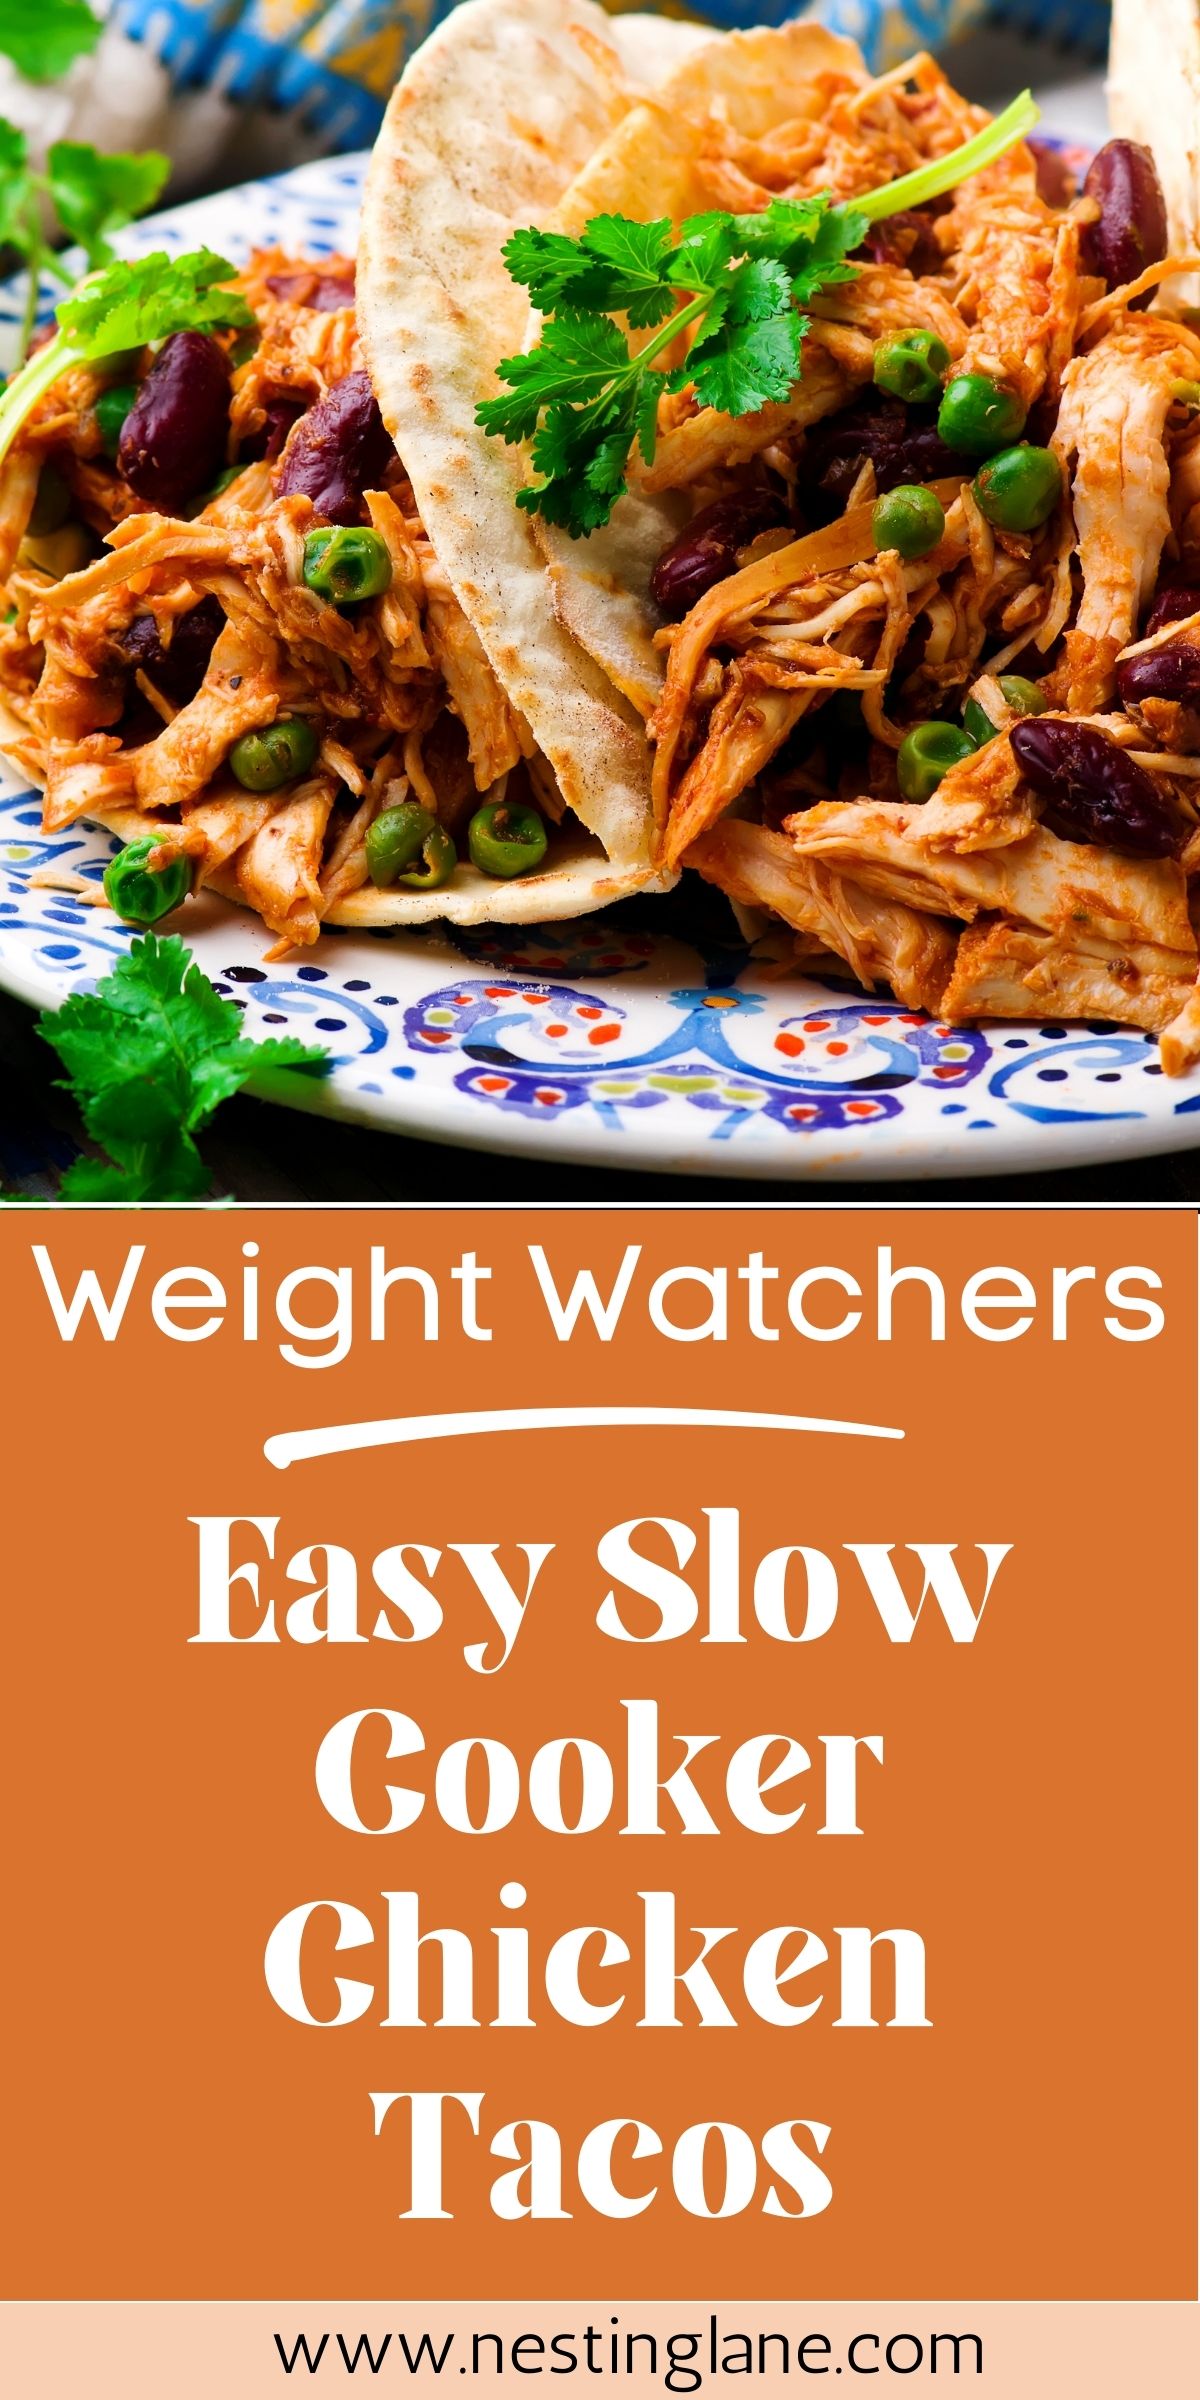 Graphic for Pinterest of Easy Slow Cooker Chicken Tacos Recipe.